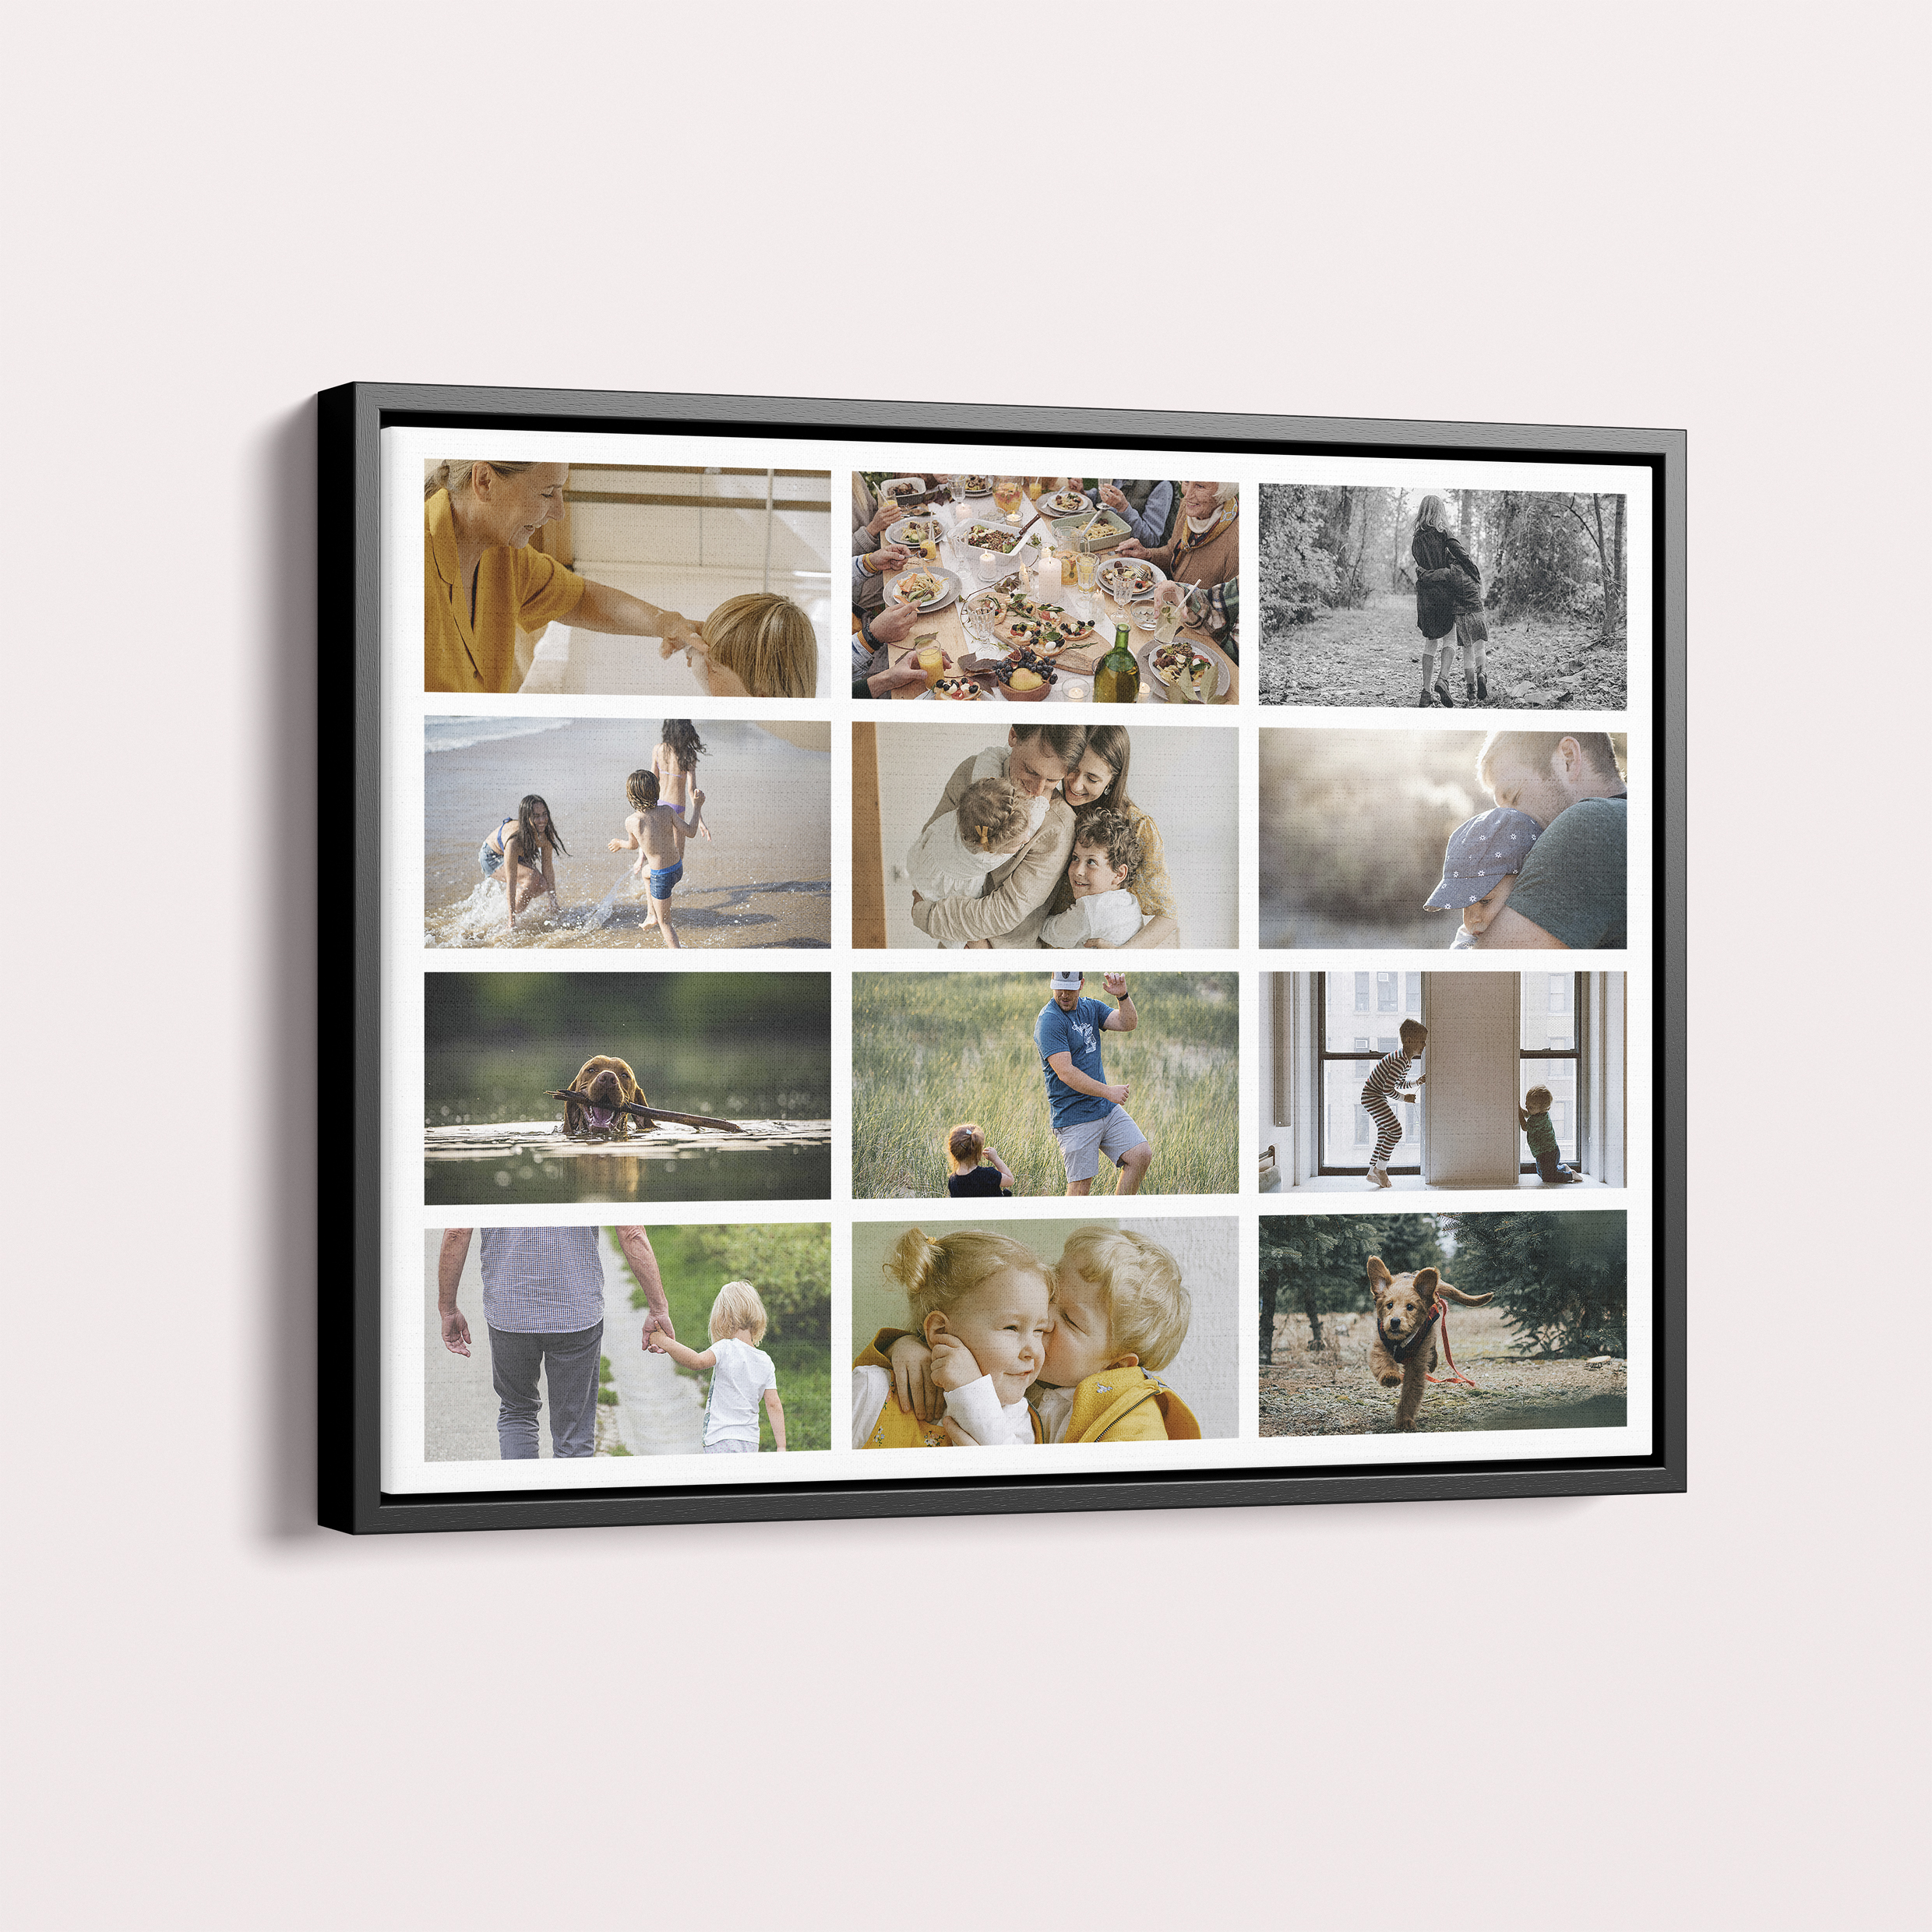  Personalized Collage of Life Framed Photo Canvas - Curate cherished memories with this stylish design, accommodating 10+ photos in a landscape orientation.